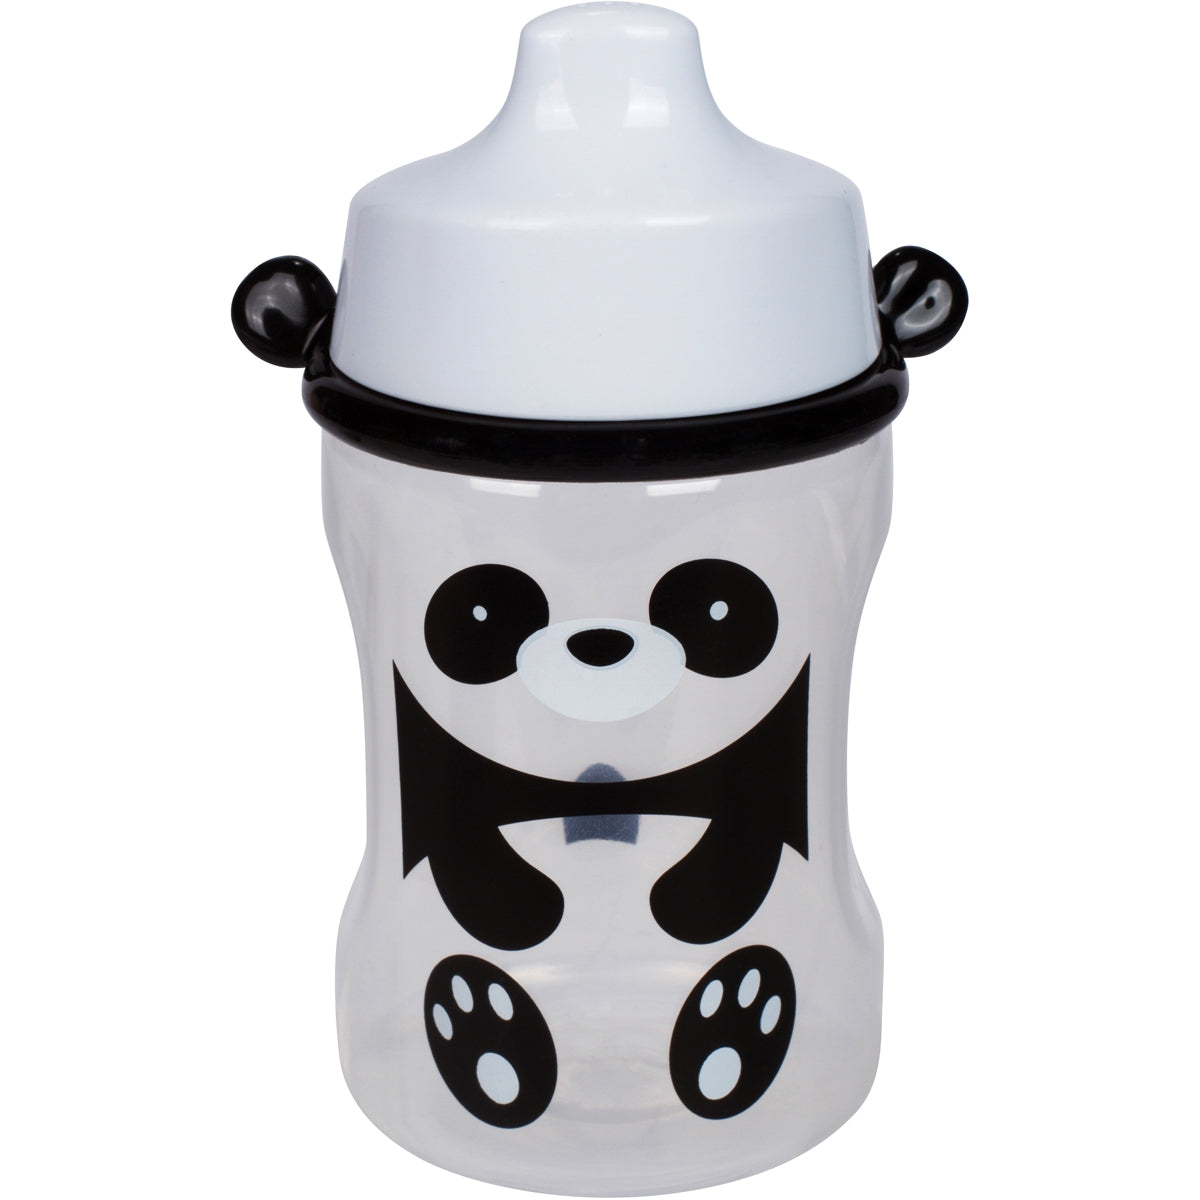 Lollacup - Straw Sippy Cup